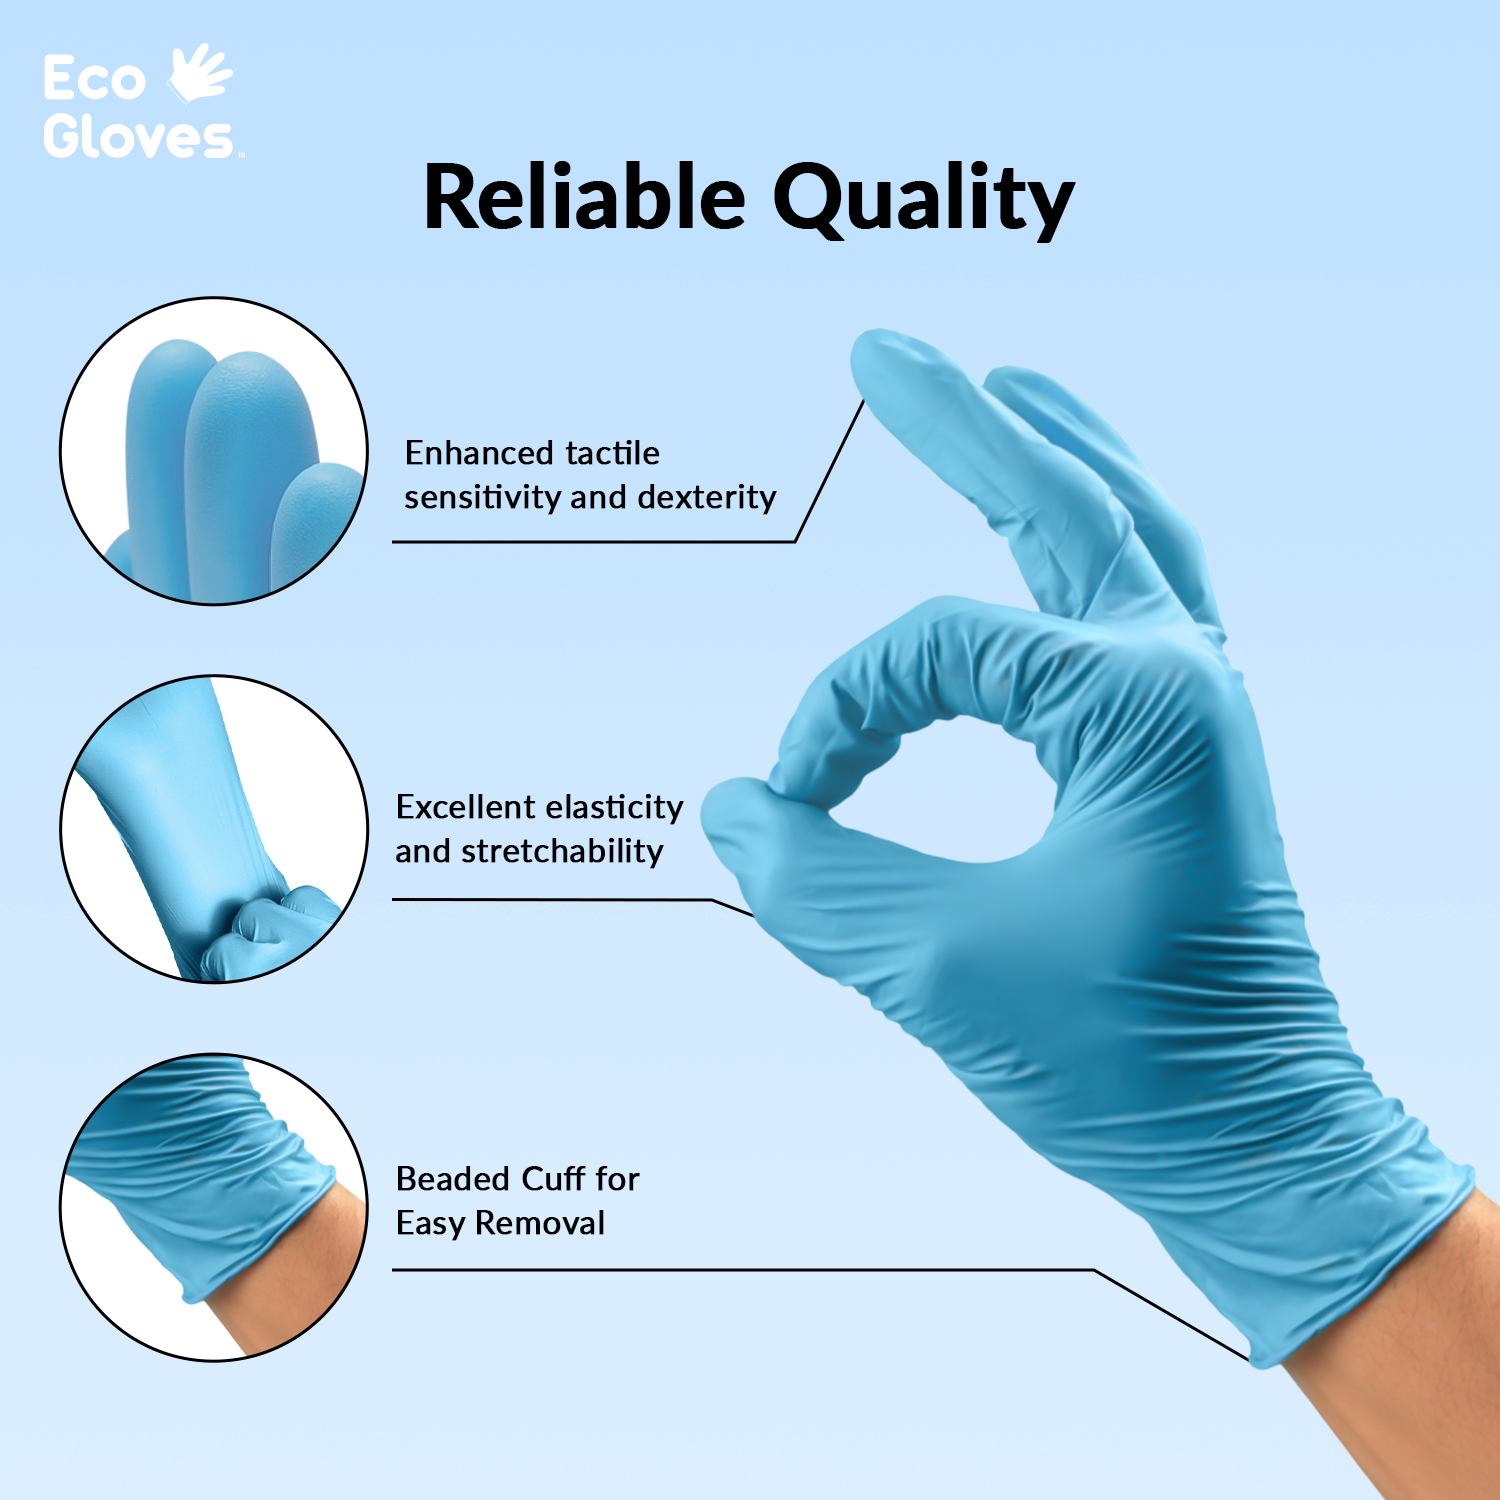 Kingfa Blue Nitrile Disposable Gloves (3.5 mil) 100 Gloves/Box - 100% Recyclable